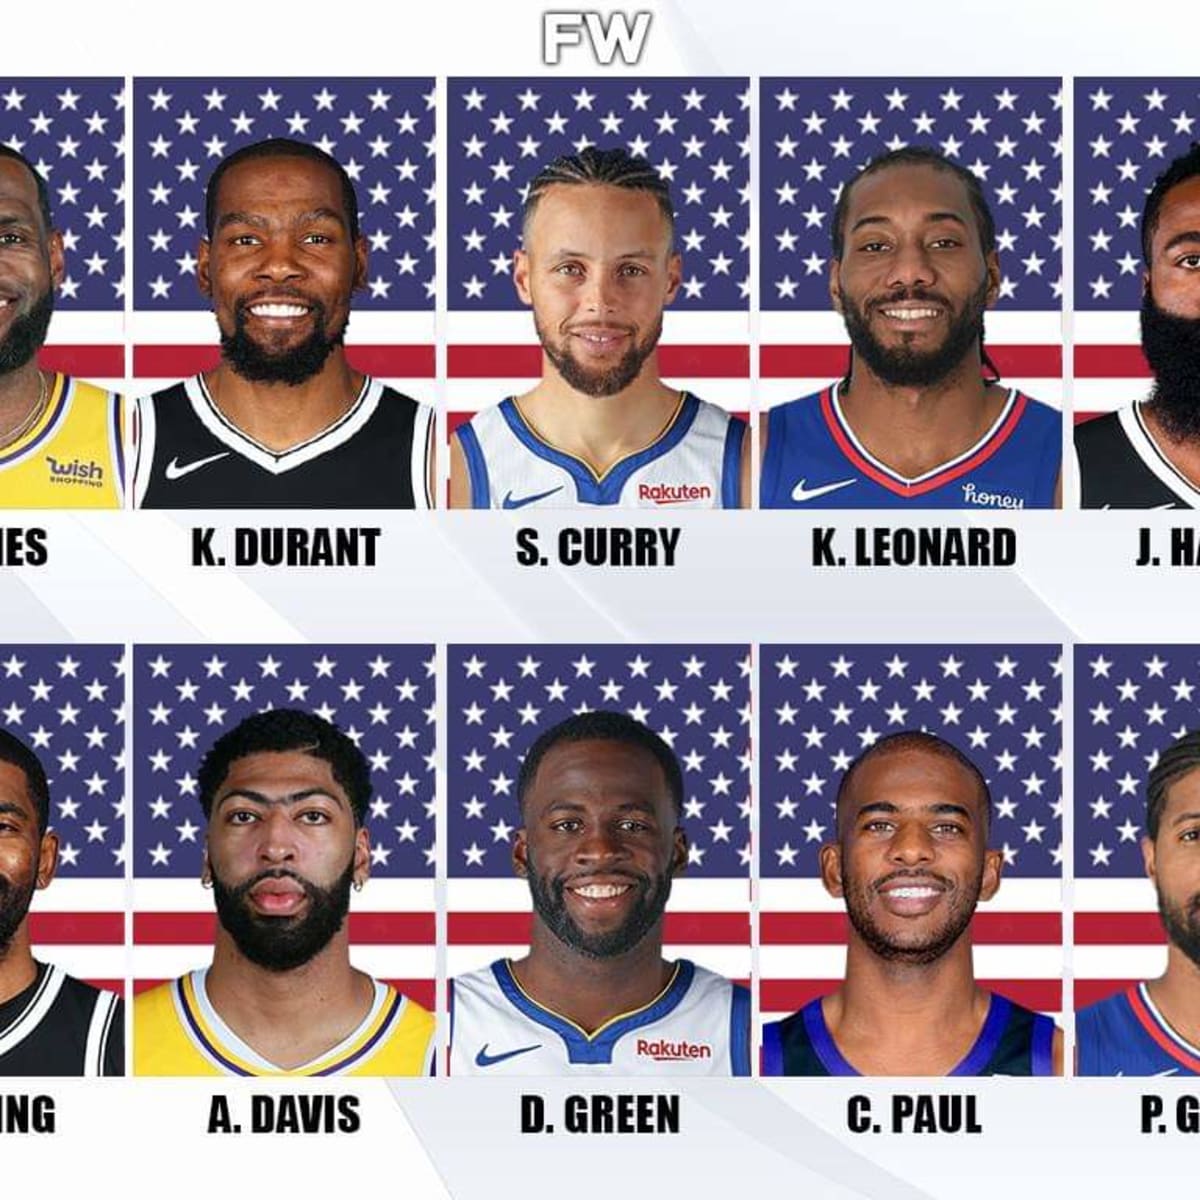 10 Nba Stars That Will Play And 10 Nba Stars That Will Not Play For The Usa Dream Team In 2021 Olympics Fadeaway World